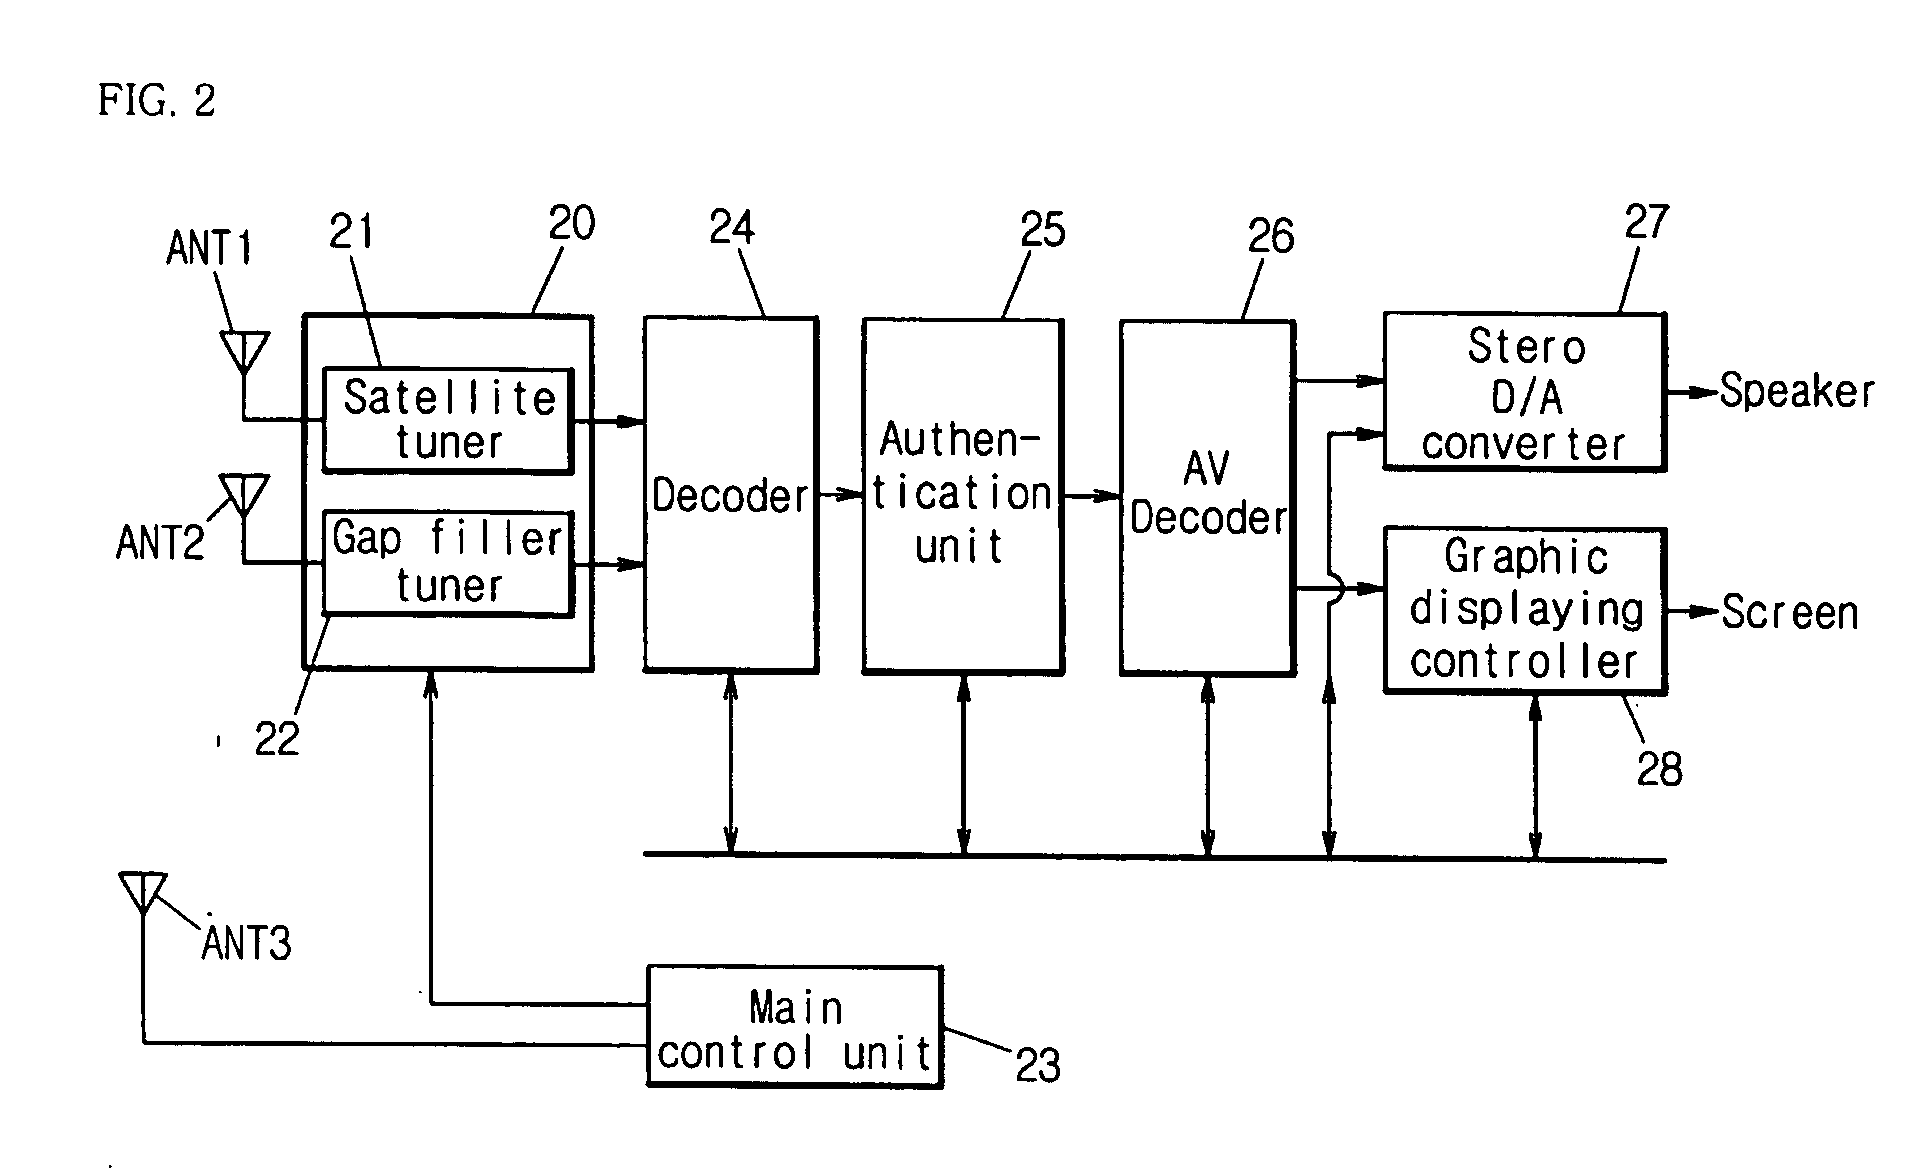 Apparatus and method of controlling diversity reception for mobile communication terminal combined with satellite DMB receiver